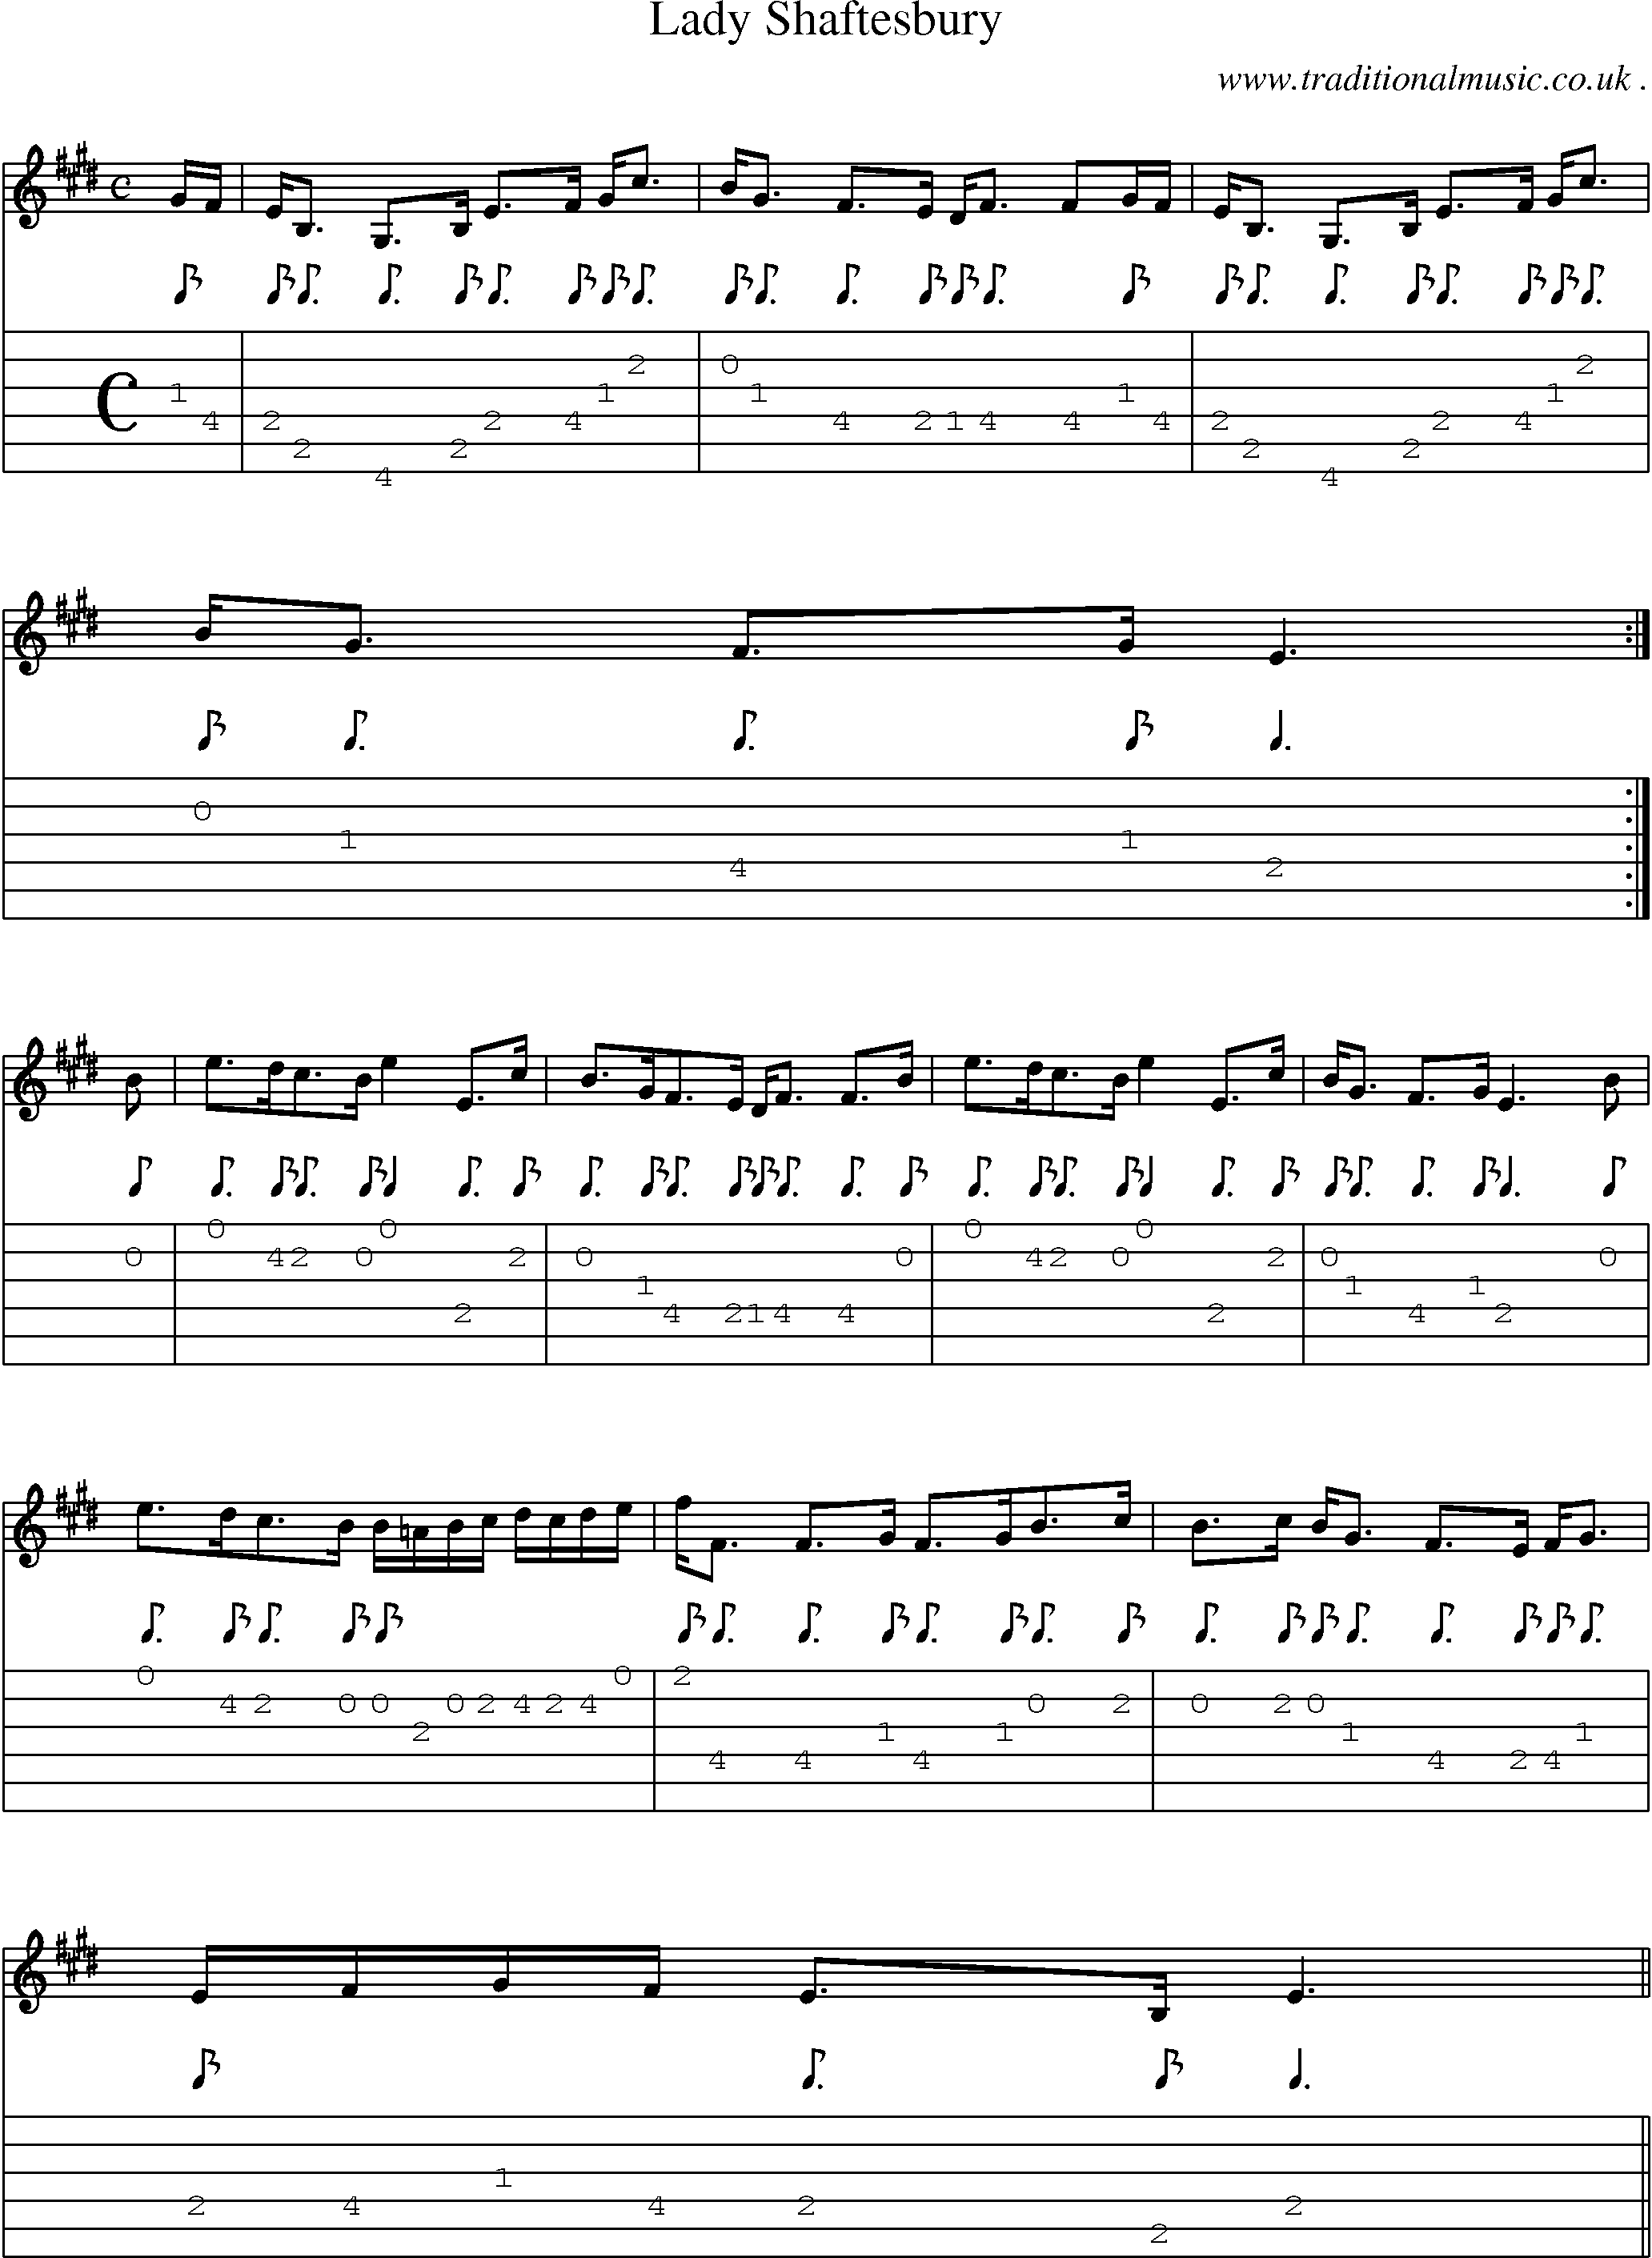 Sheet-music  score, Chords and Guitar Tabs for Lady Shaftesbury